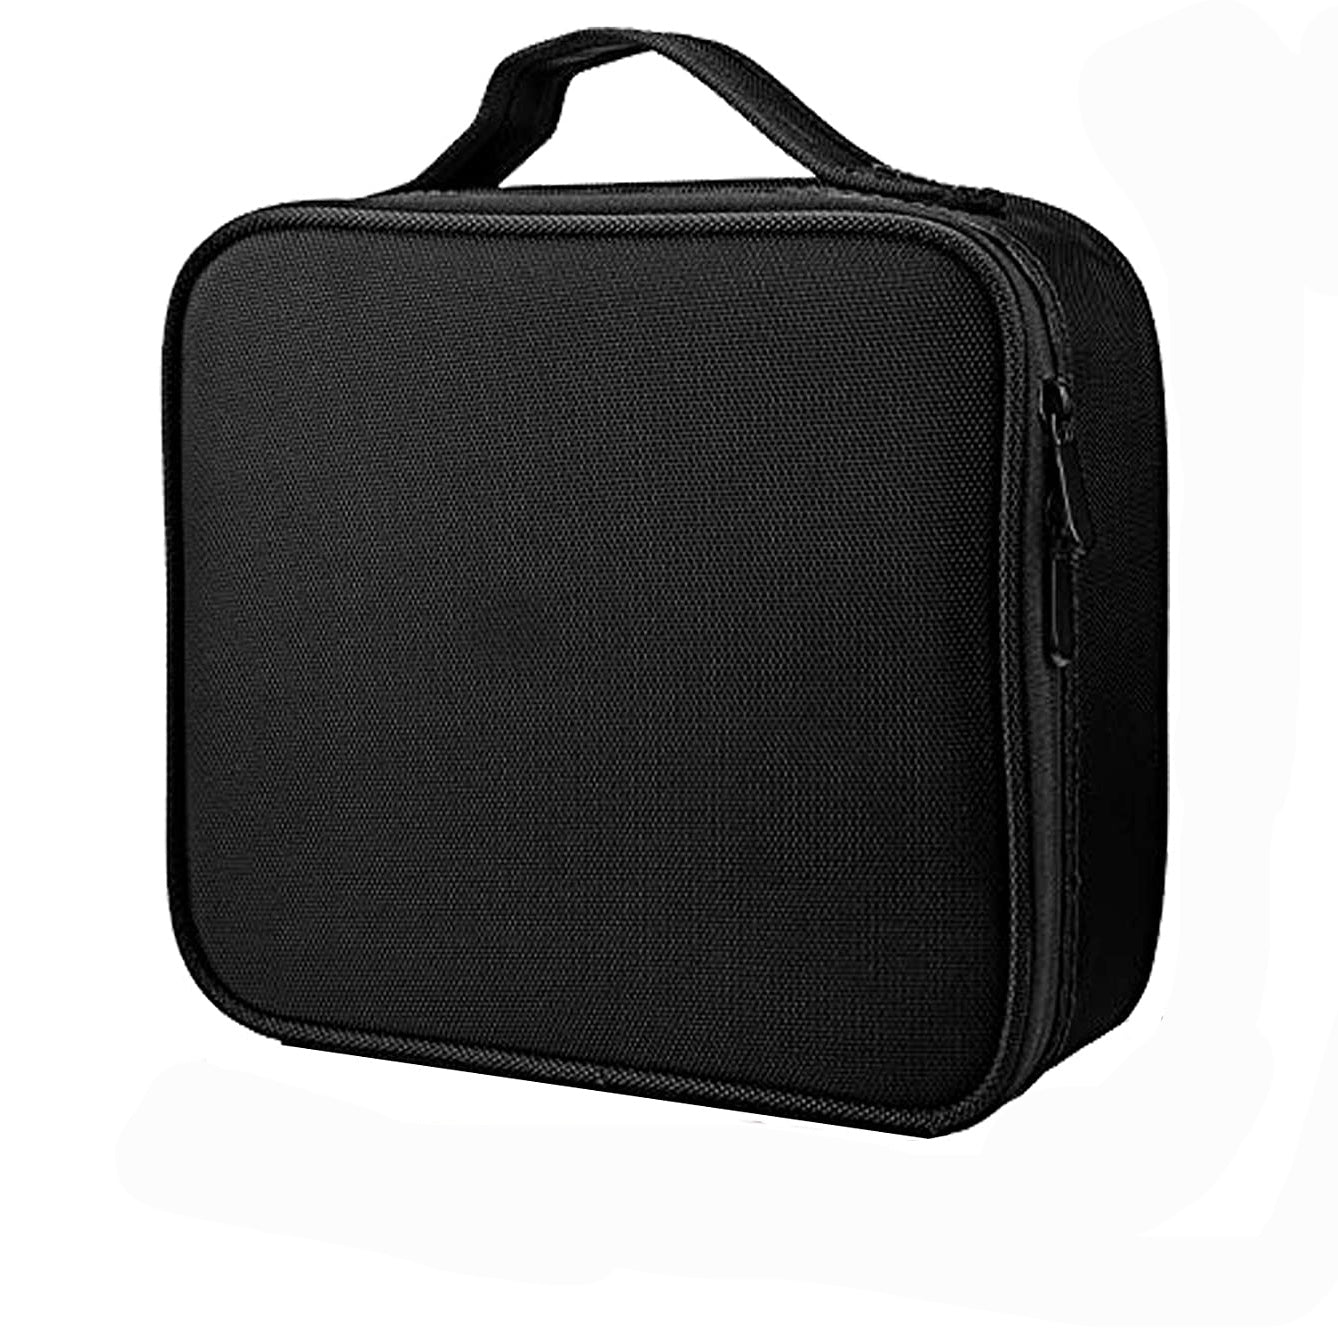 Makeup Cosmetic Storage Case with Adjustable Compartment (Black)